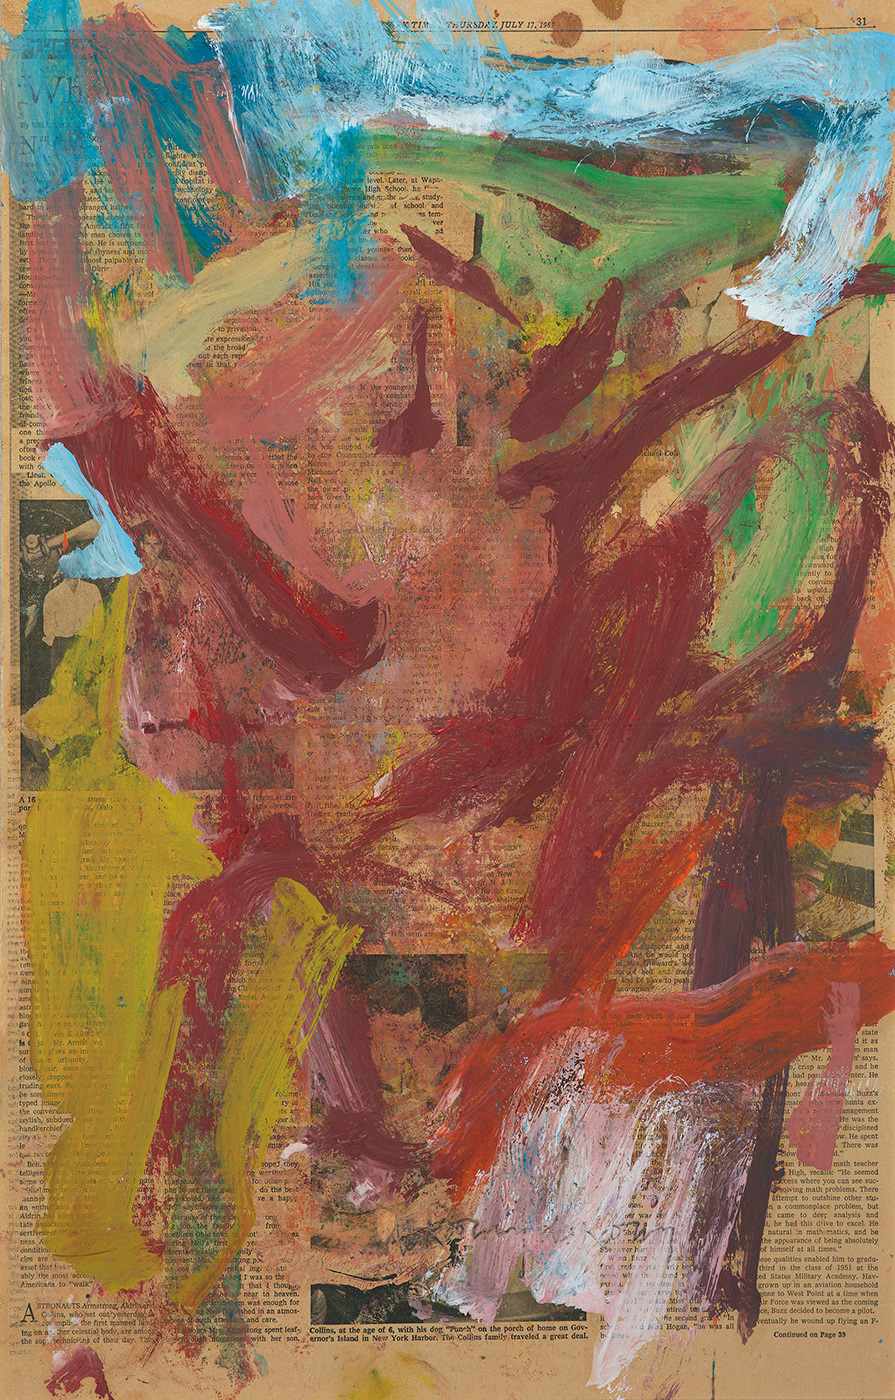 Willem de Kooning, Thursday July 17, 1969,  Oil on Newspaper,  23 x 14 1/2 inches, Abstract piece with muted color marks over a newspaper page. Willem de Kooning was one of the largest Abstract Expressionist painters who focused on gestural movement, Cubism, Surrealism and Expressionism.